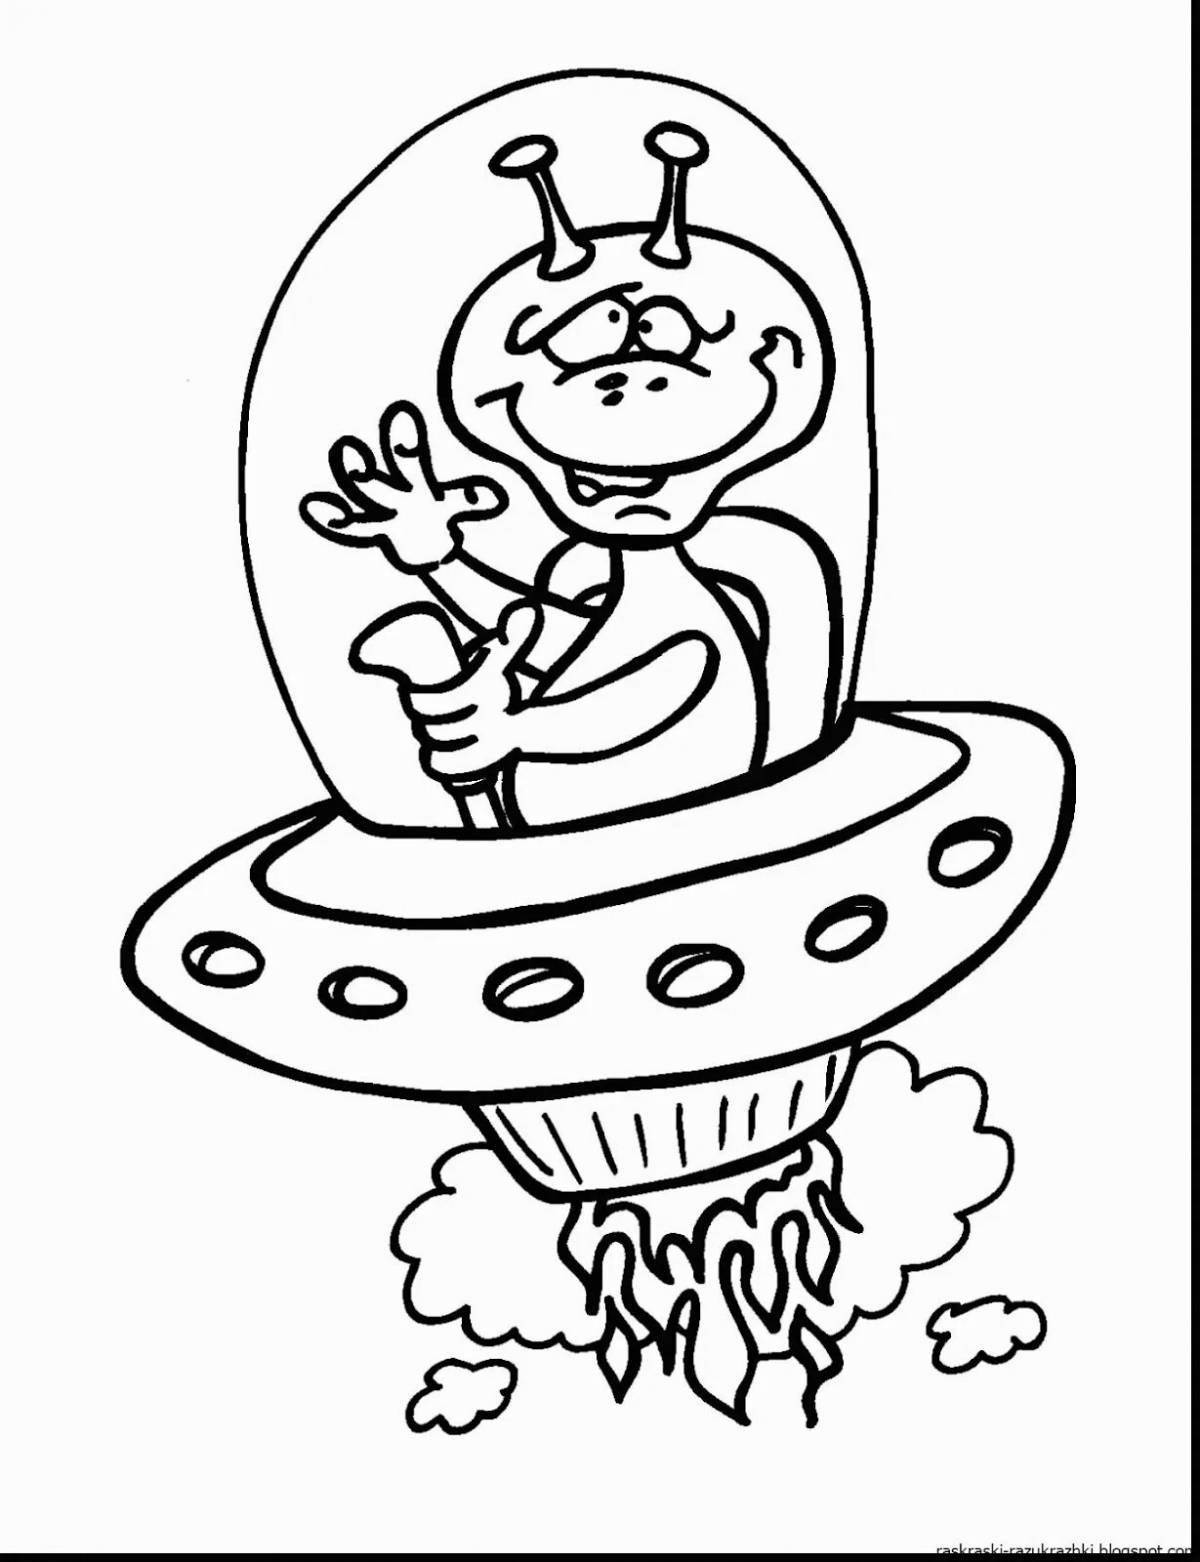 Colorful alien coloring pages for kids